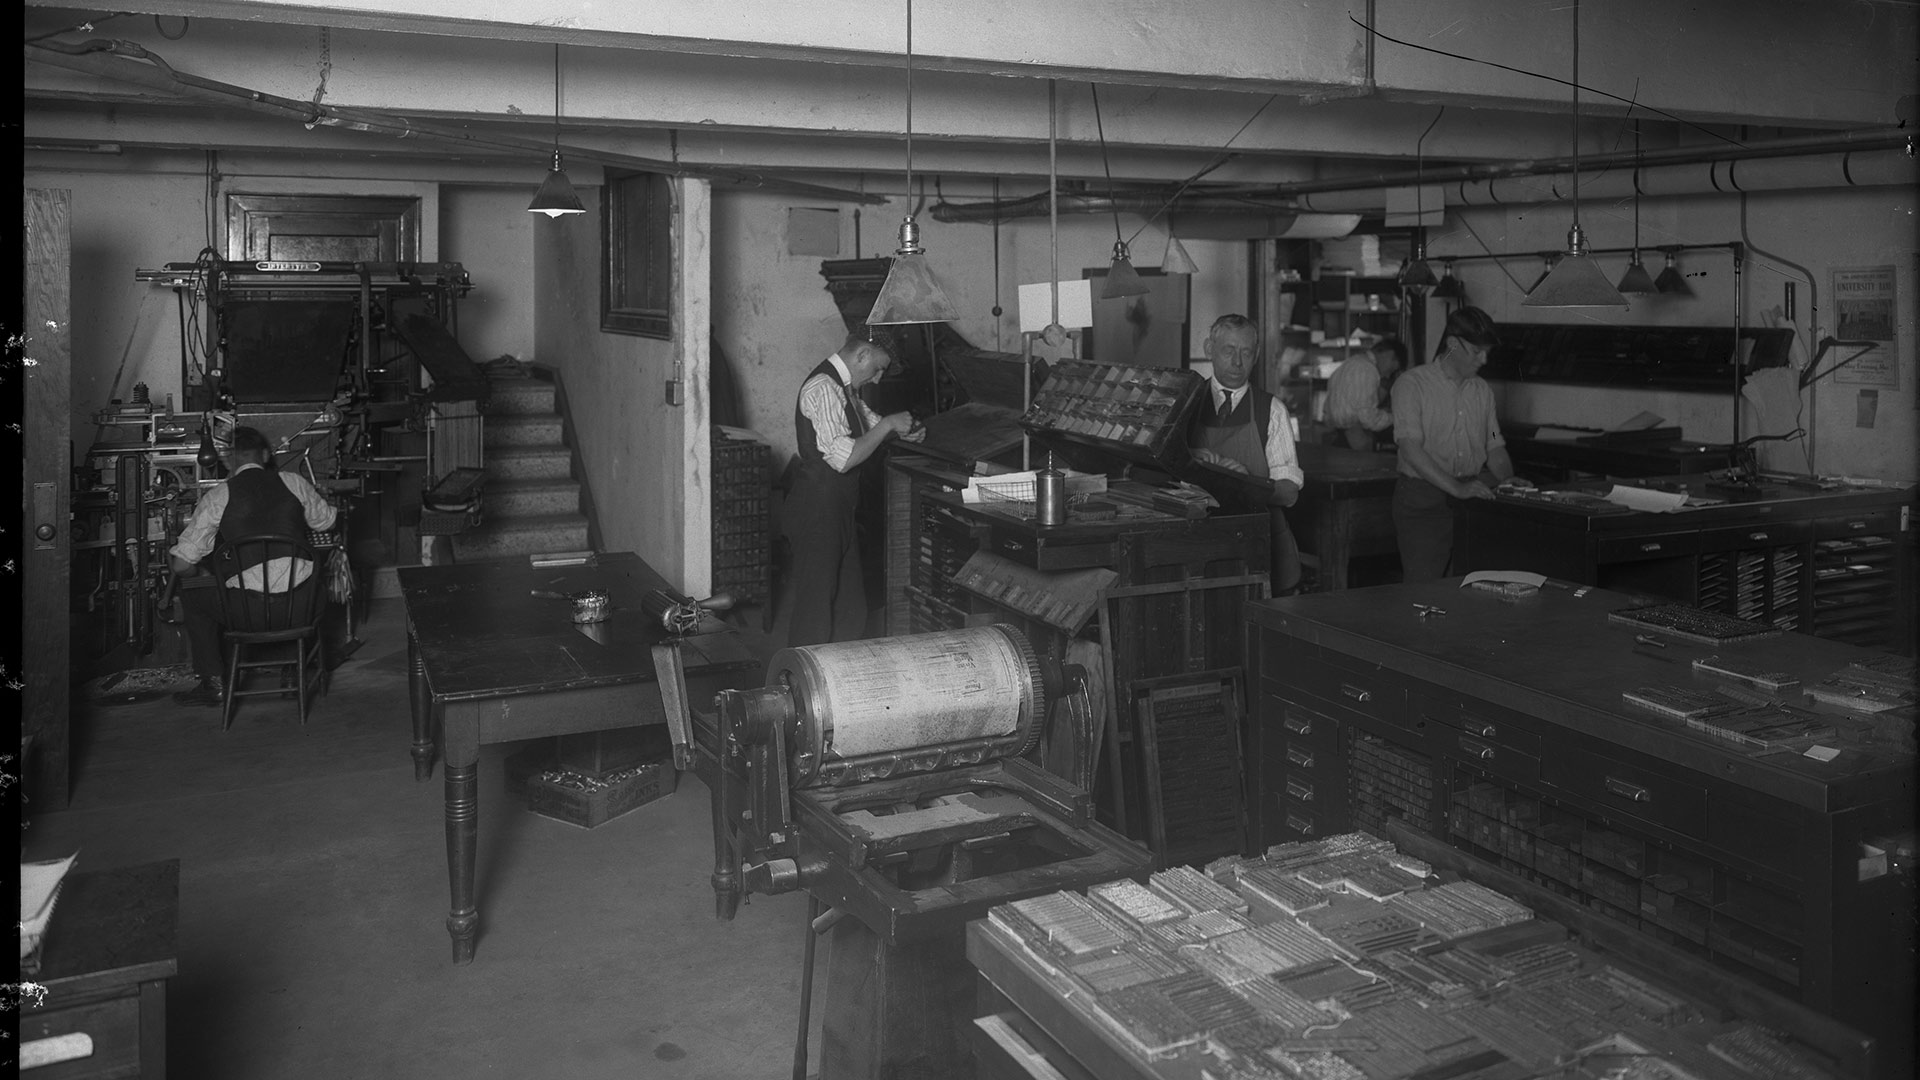 A black and white image of five men working on printing presses in an underground room